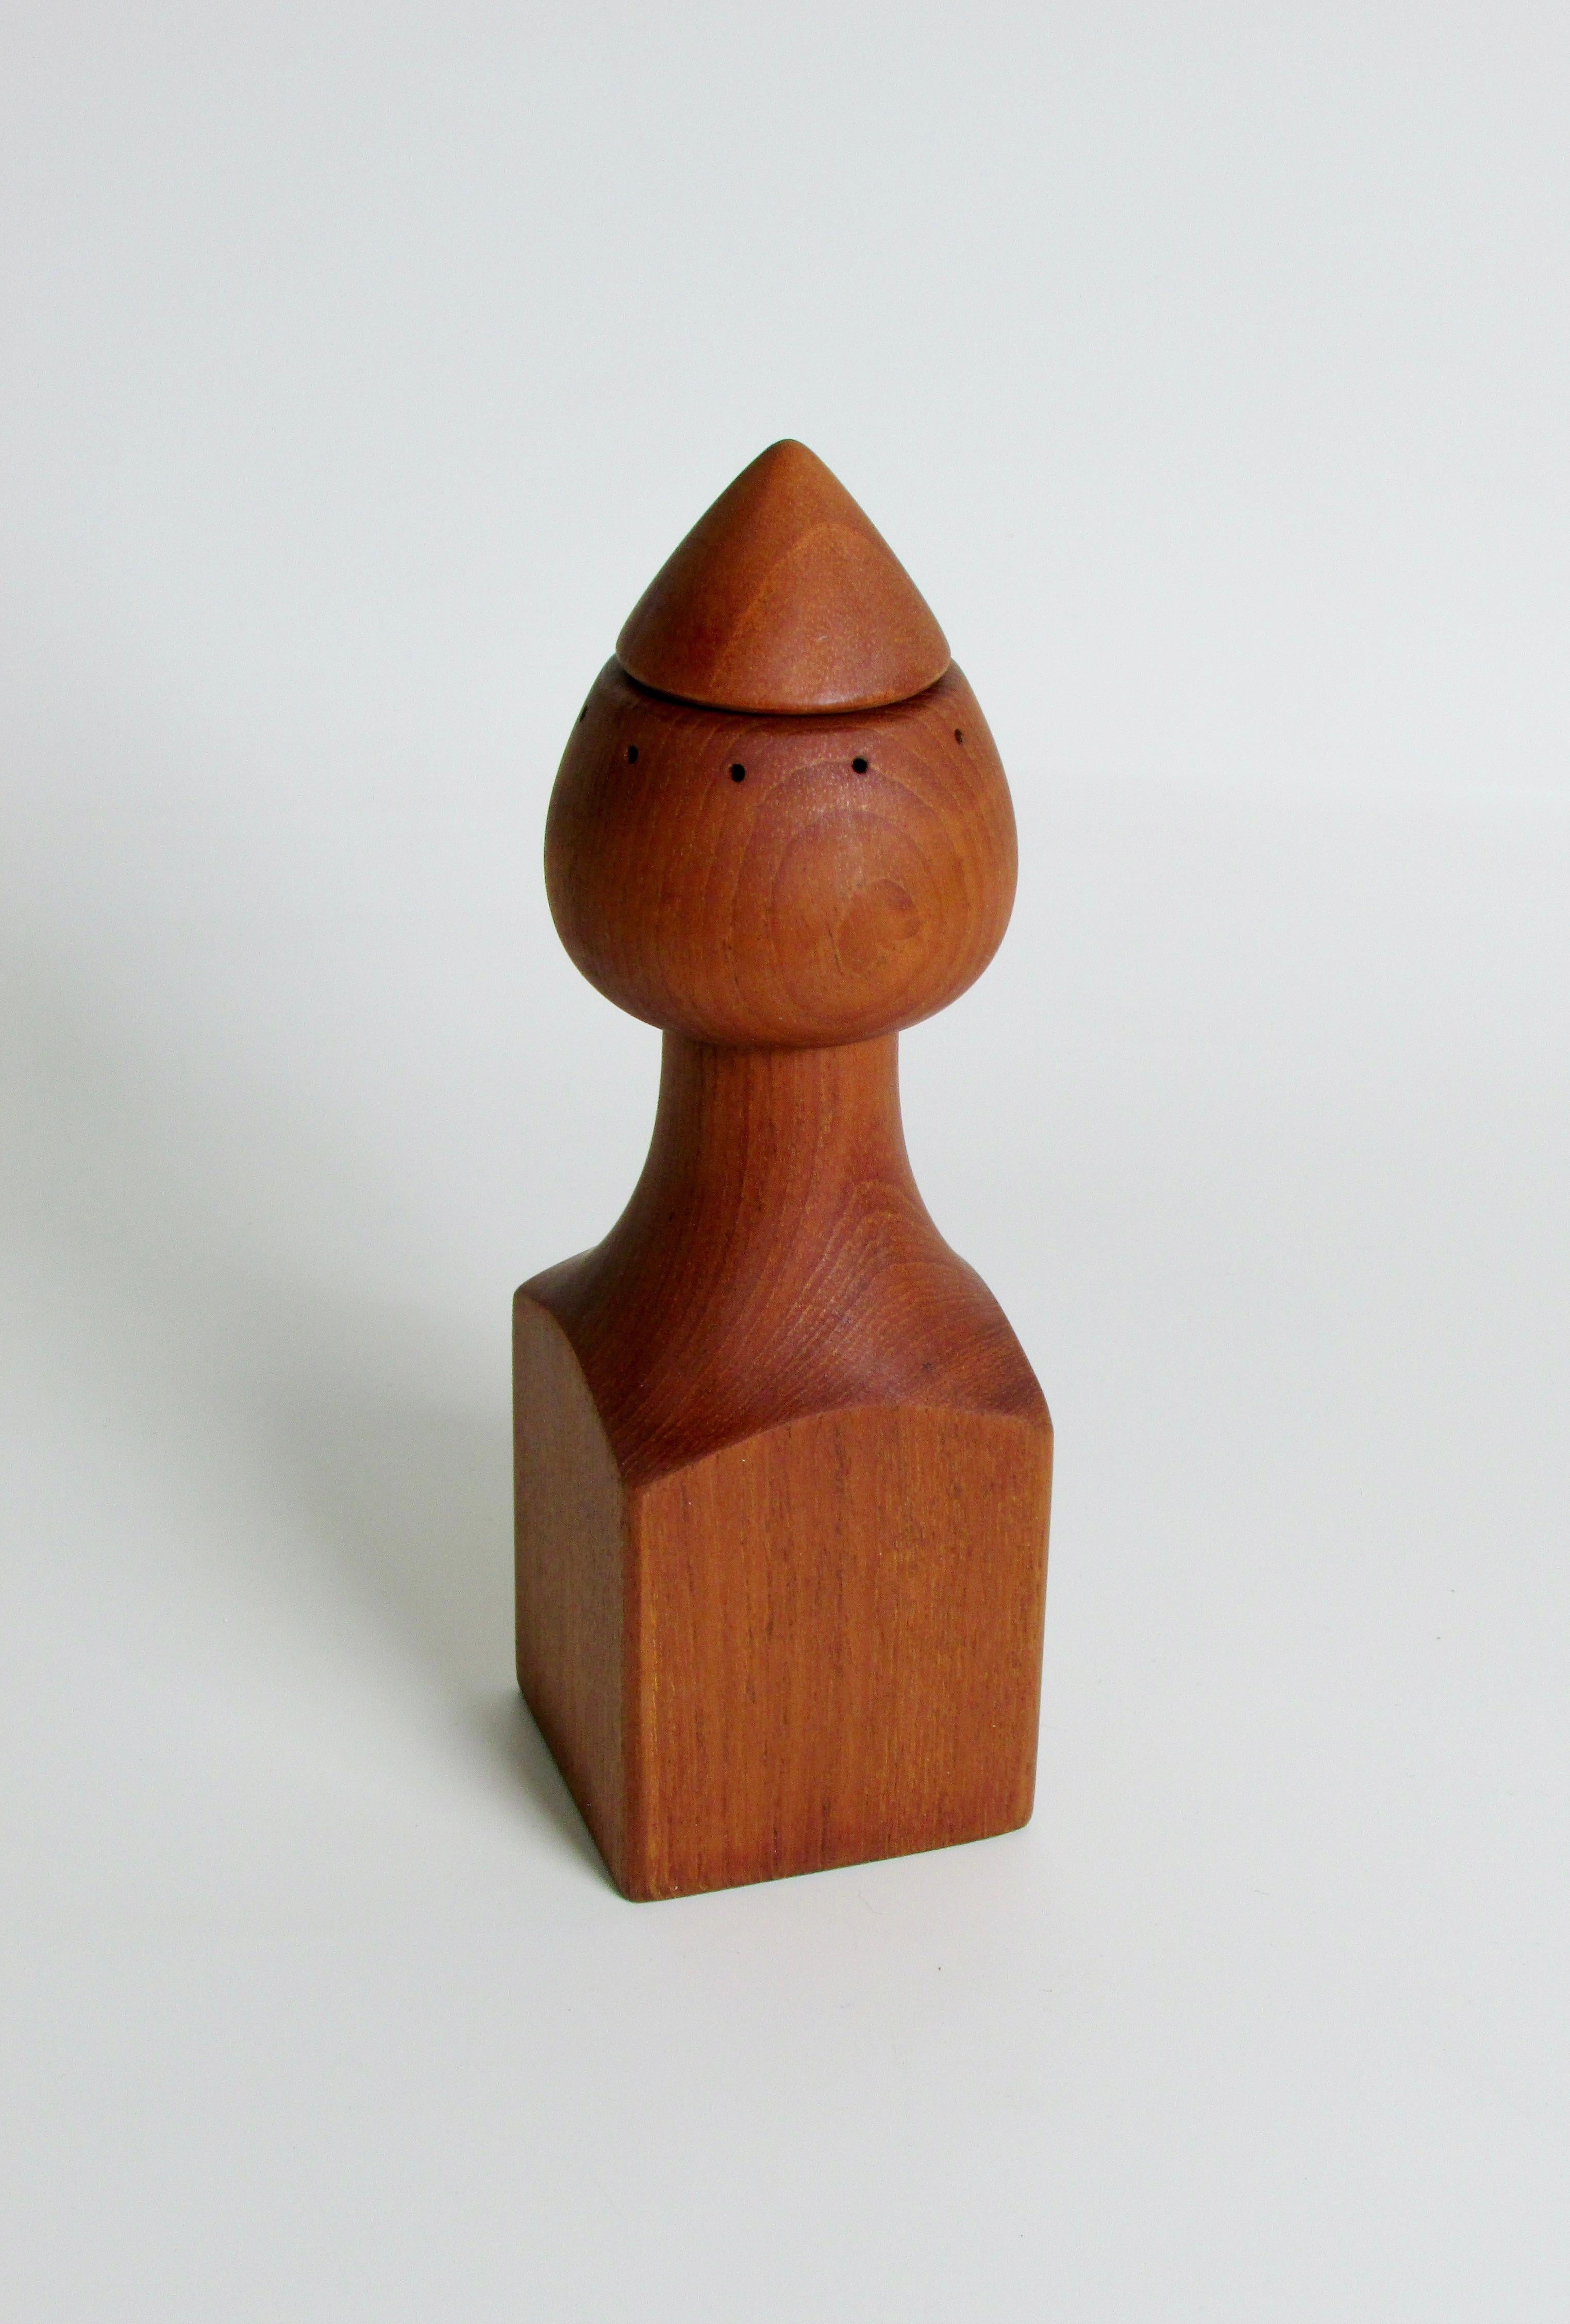 Marked Denmark JHQ Jens Harold Quistgaard the number one designer for Dansk . The company that produced numerous and varied peppermill designs . I do not like to over use the word but this is a rare one . I have seen it maybe once outside of